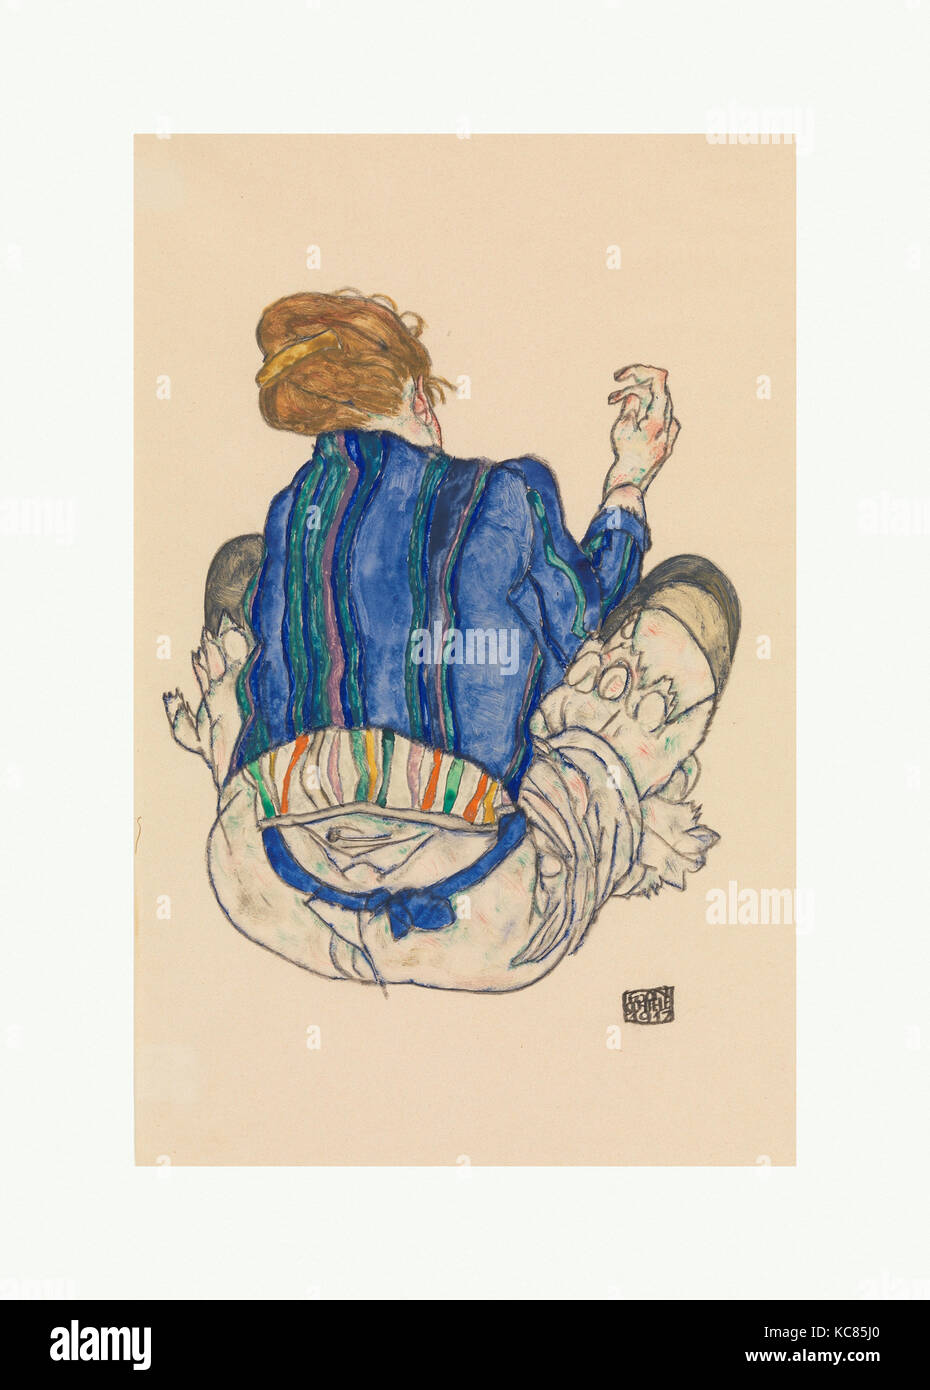 Seated Woman, Back View, 1917, Watercolor, gouache, and graphite on paper, 18 1/4 x 11 3/4 in. (46.4 x 29.8 cm), Drawings, Egon Stock Photo